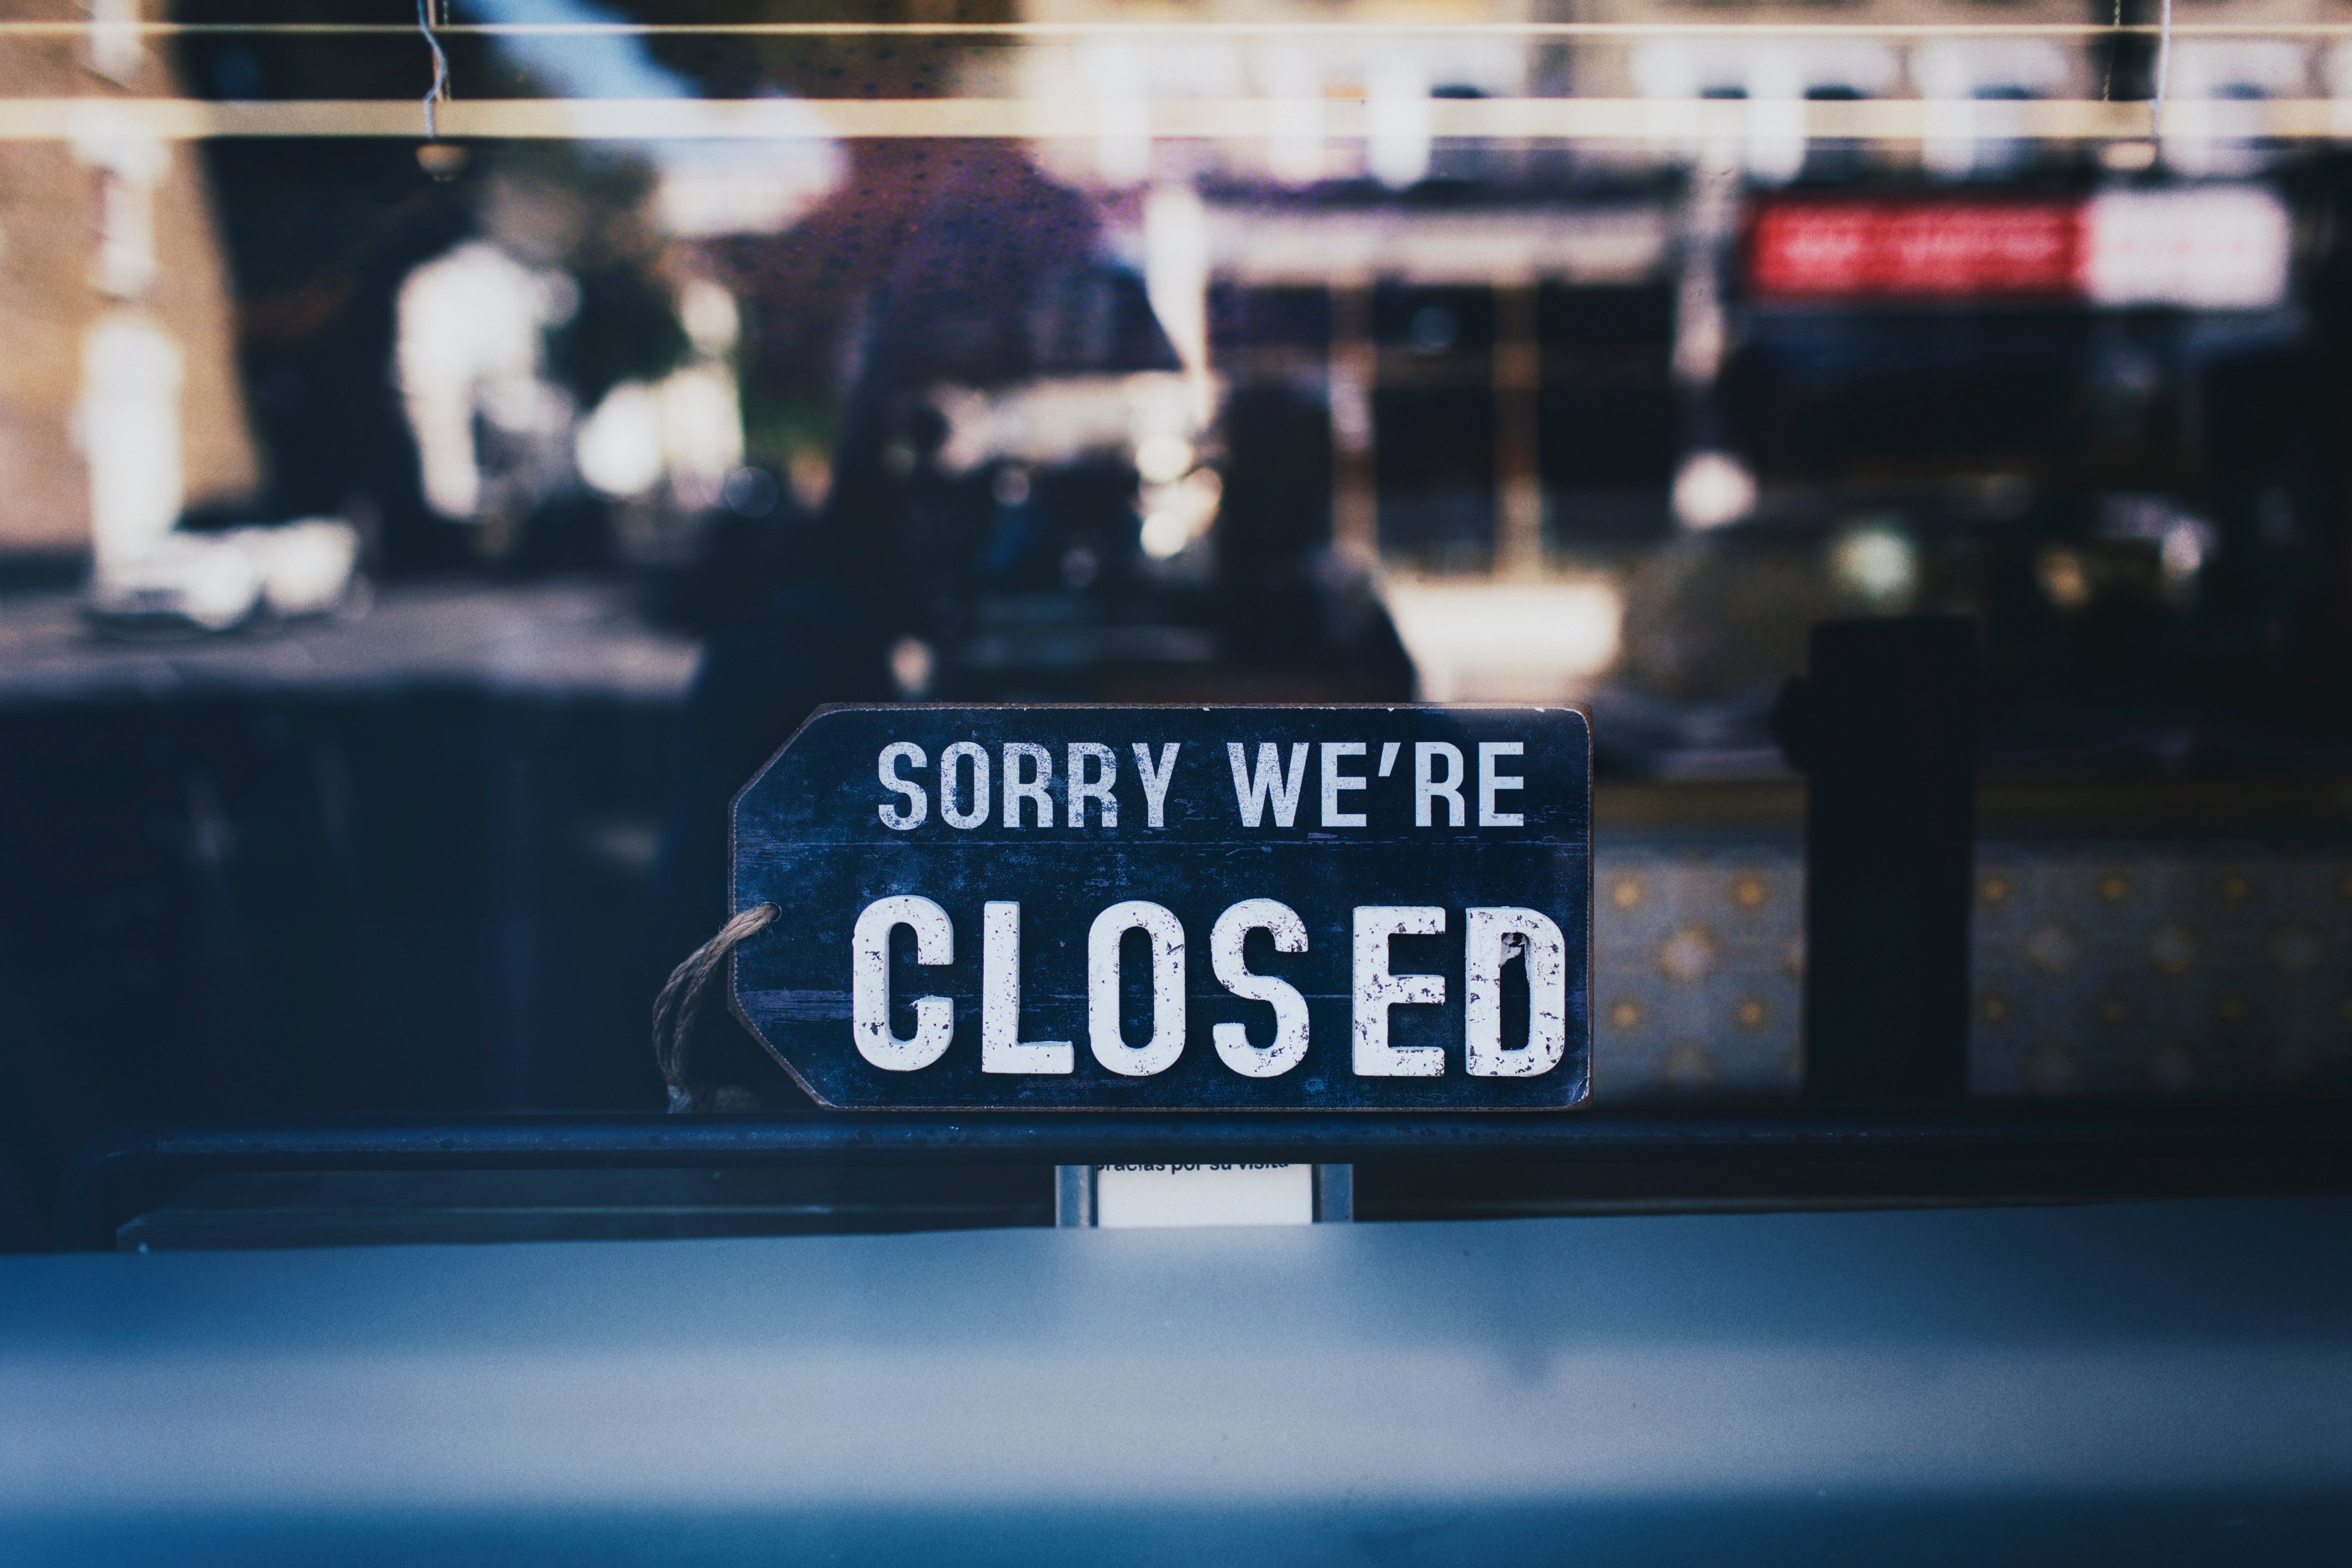 close-up-photo-of-sorry-we-re-closed-sign-on-glass-window-2467649